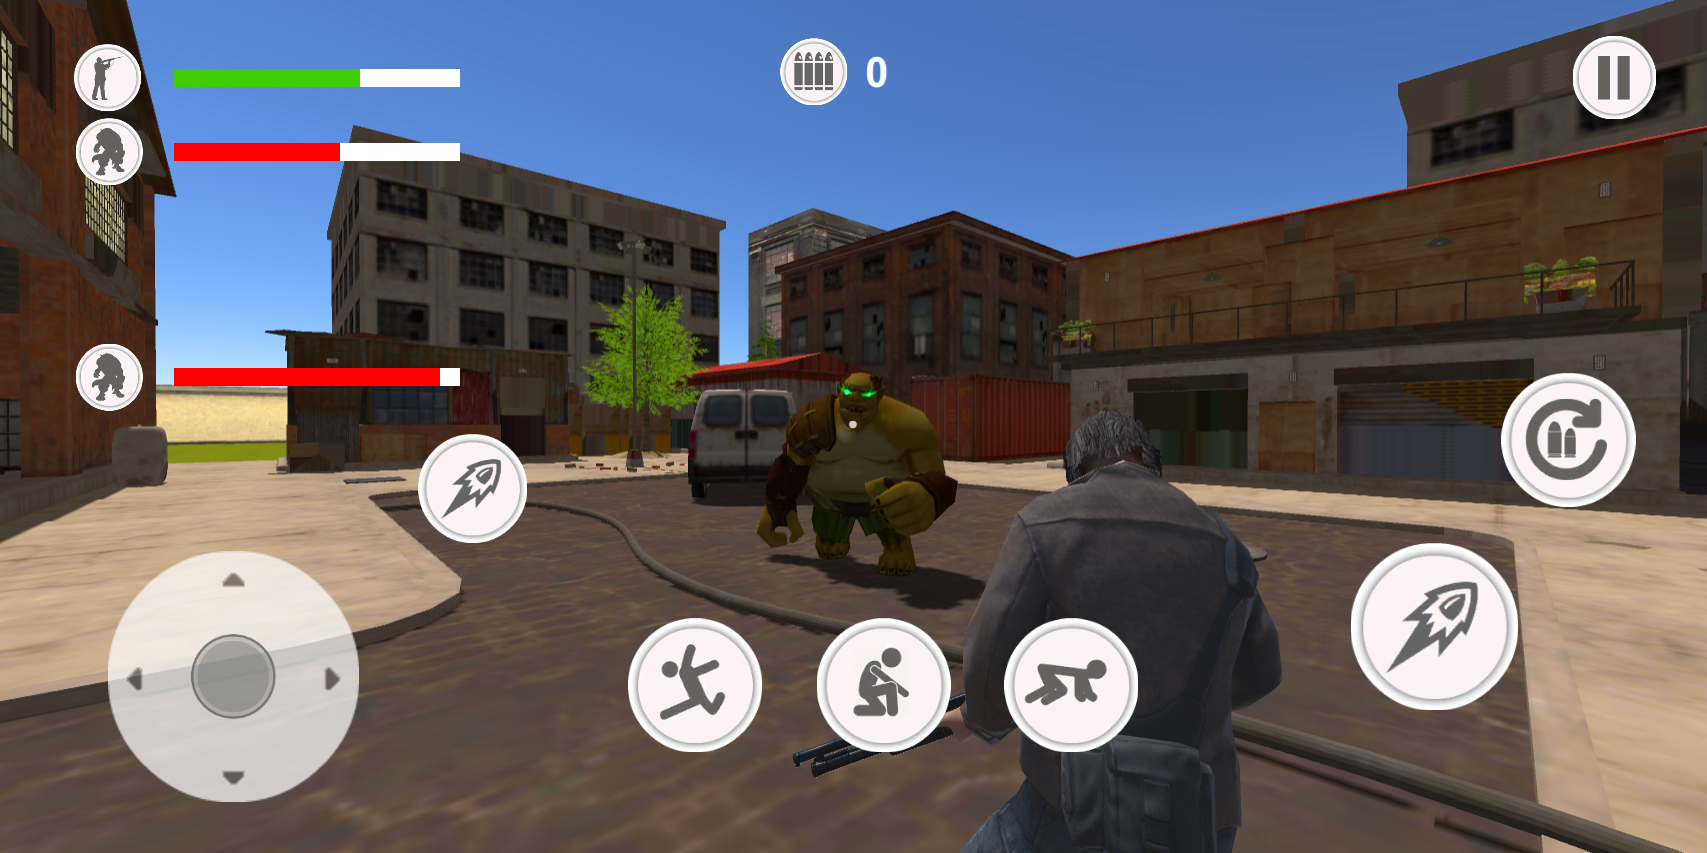 Download Bigfoot Wild Hunting Survival android on PC